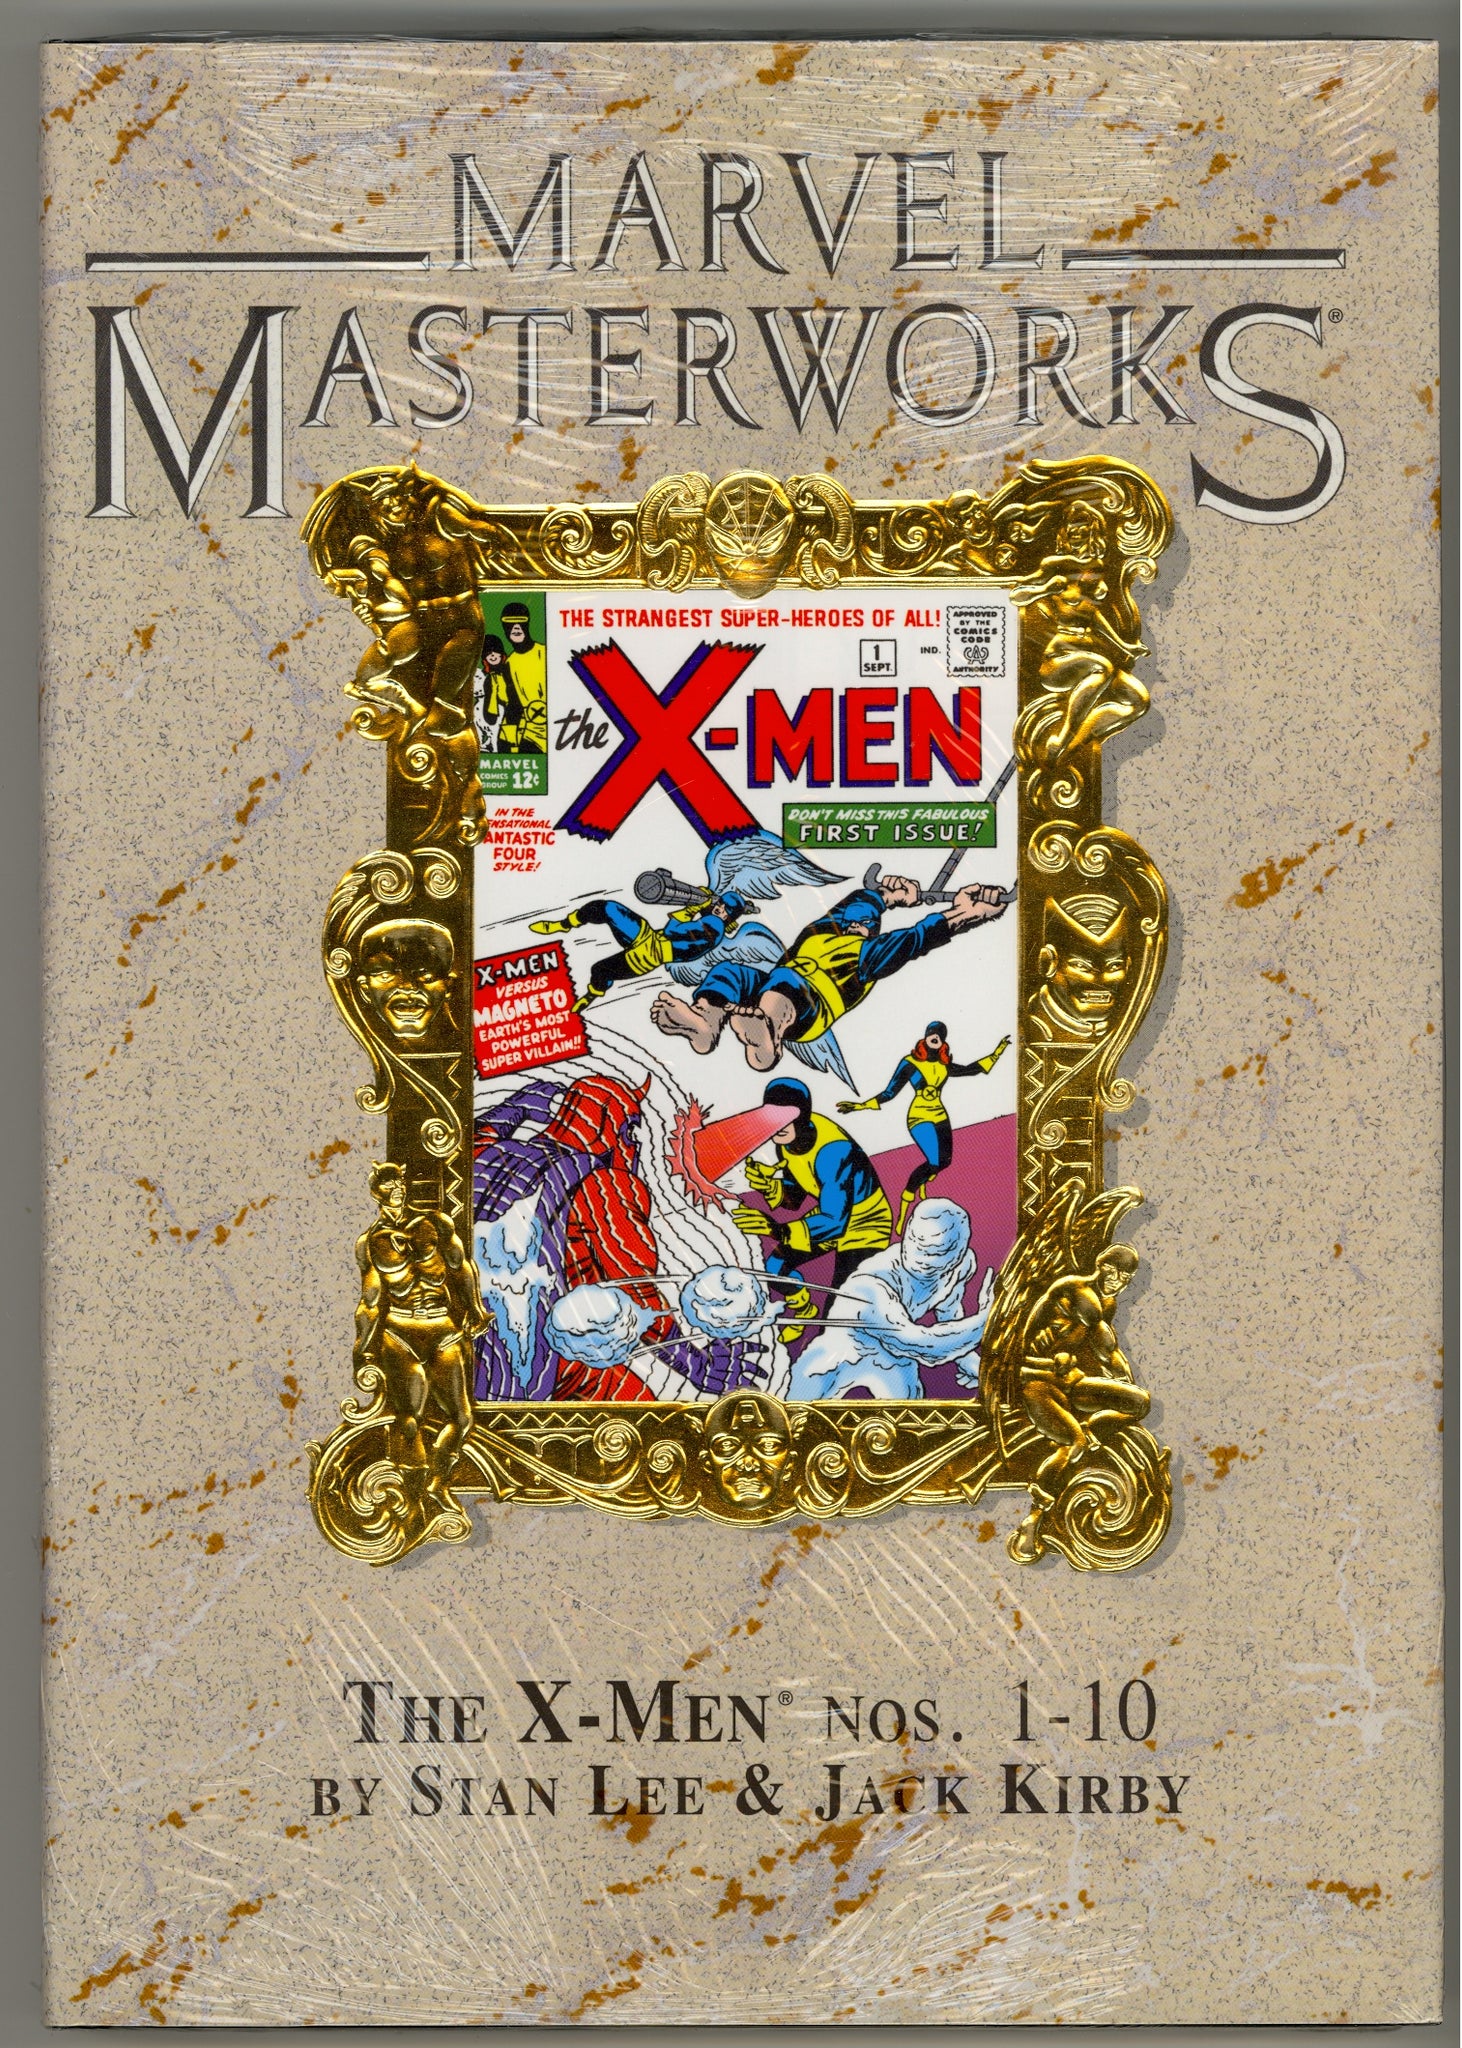 Marvel Masterworks volume 3 X-Men - Limited Collector's Edition, Issues 1-10